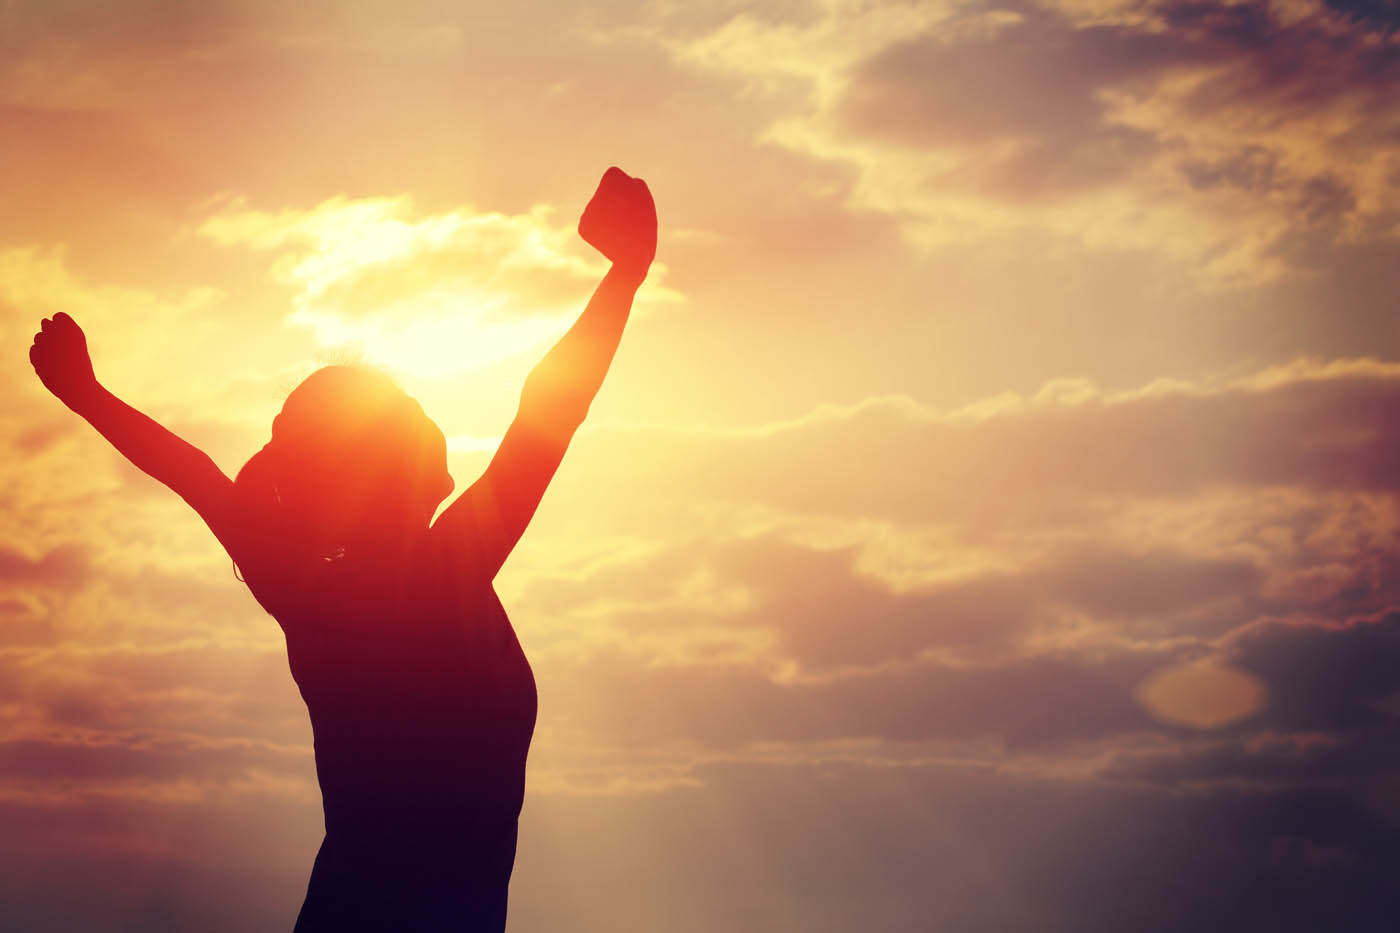 A woman standing in the light with her arms up in the air - learn how you can get relief with Light Lounge's back pain management in Southlake.